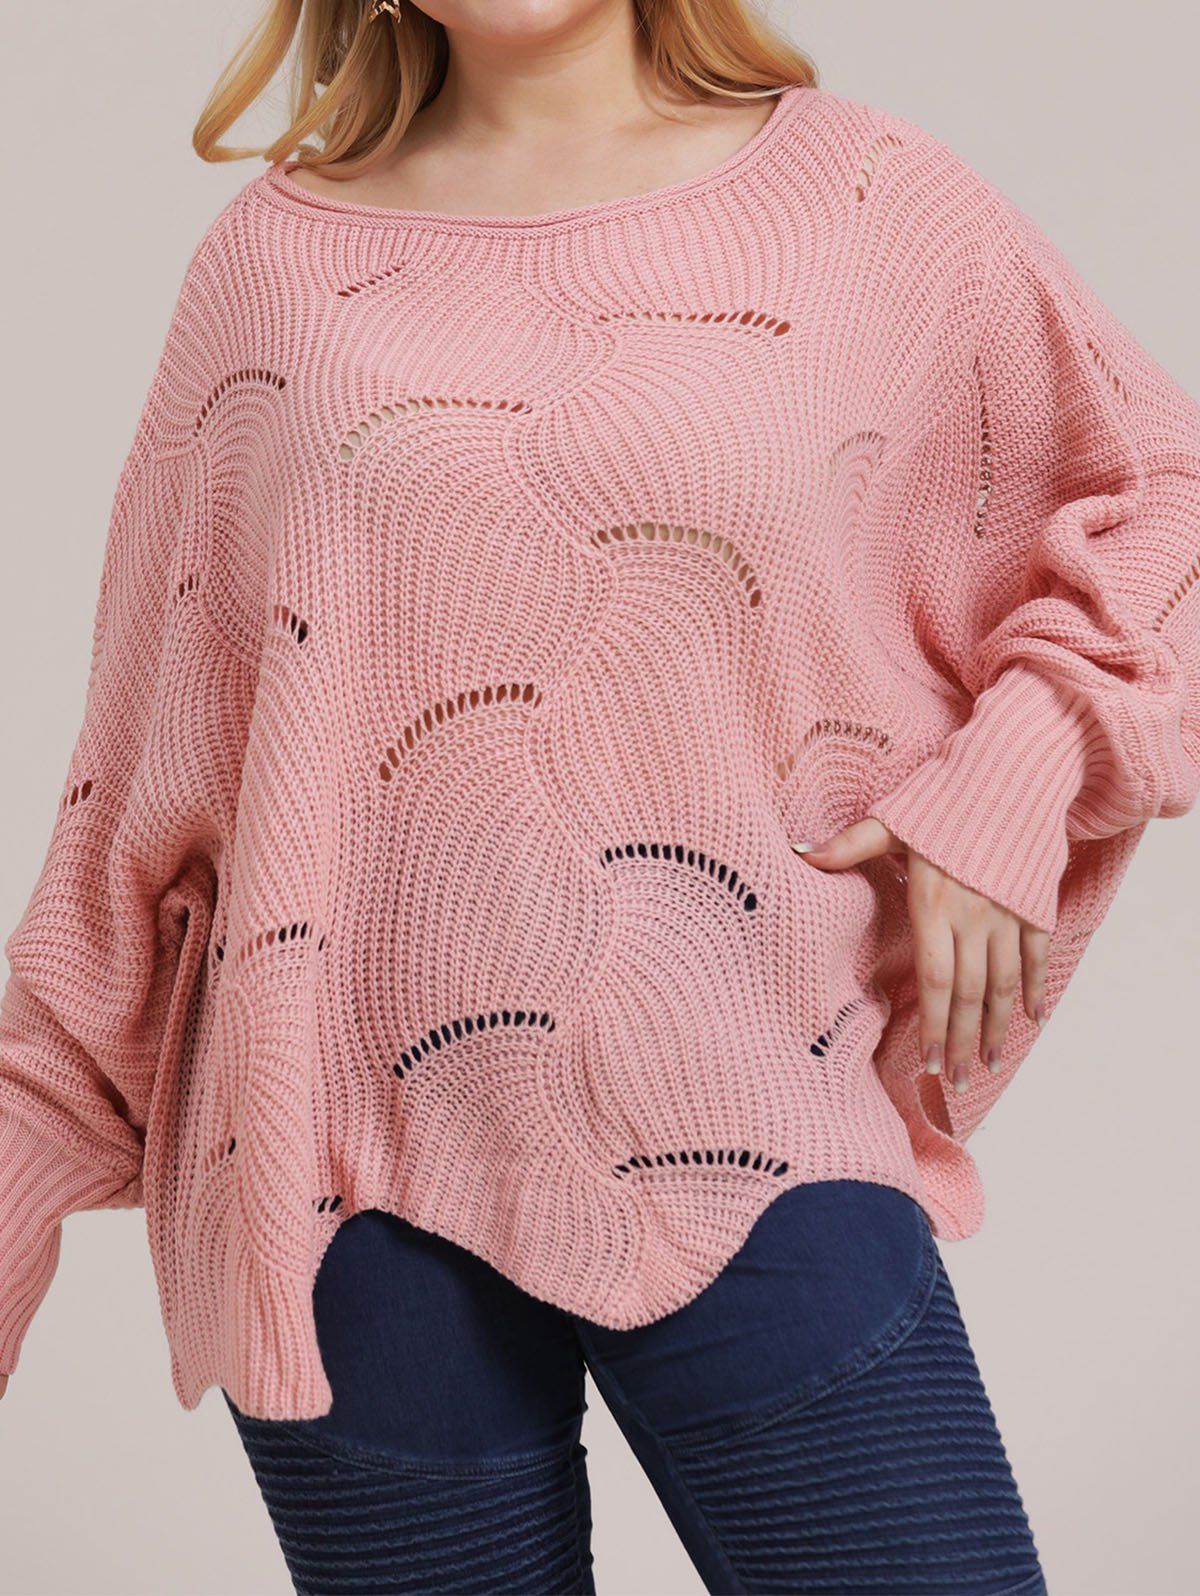 Plus Size Sweater Batwing Sleeve Asymmetric Sweater Hollow Out Solid Color Curve Sweater - LIGHT PINK 2XL